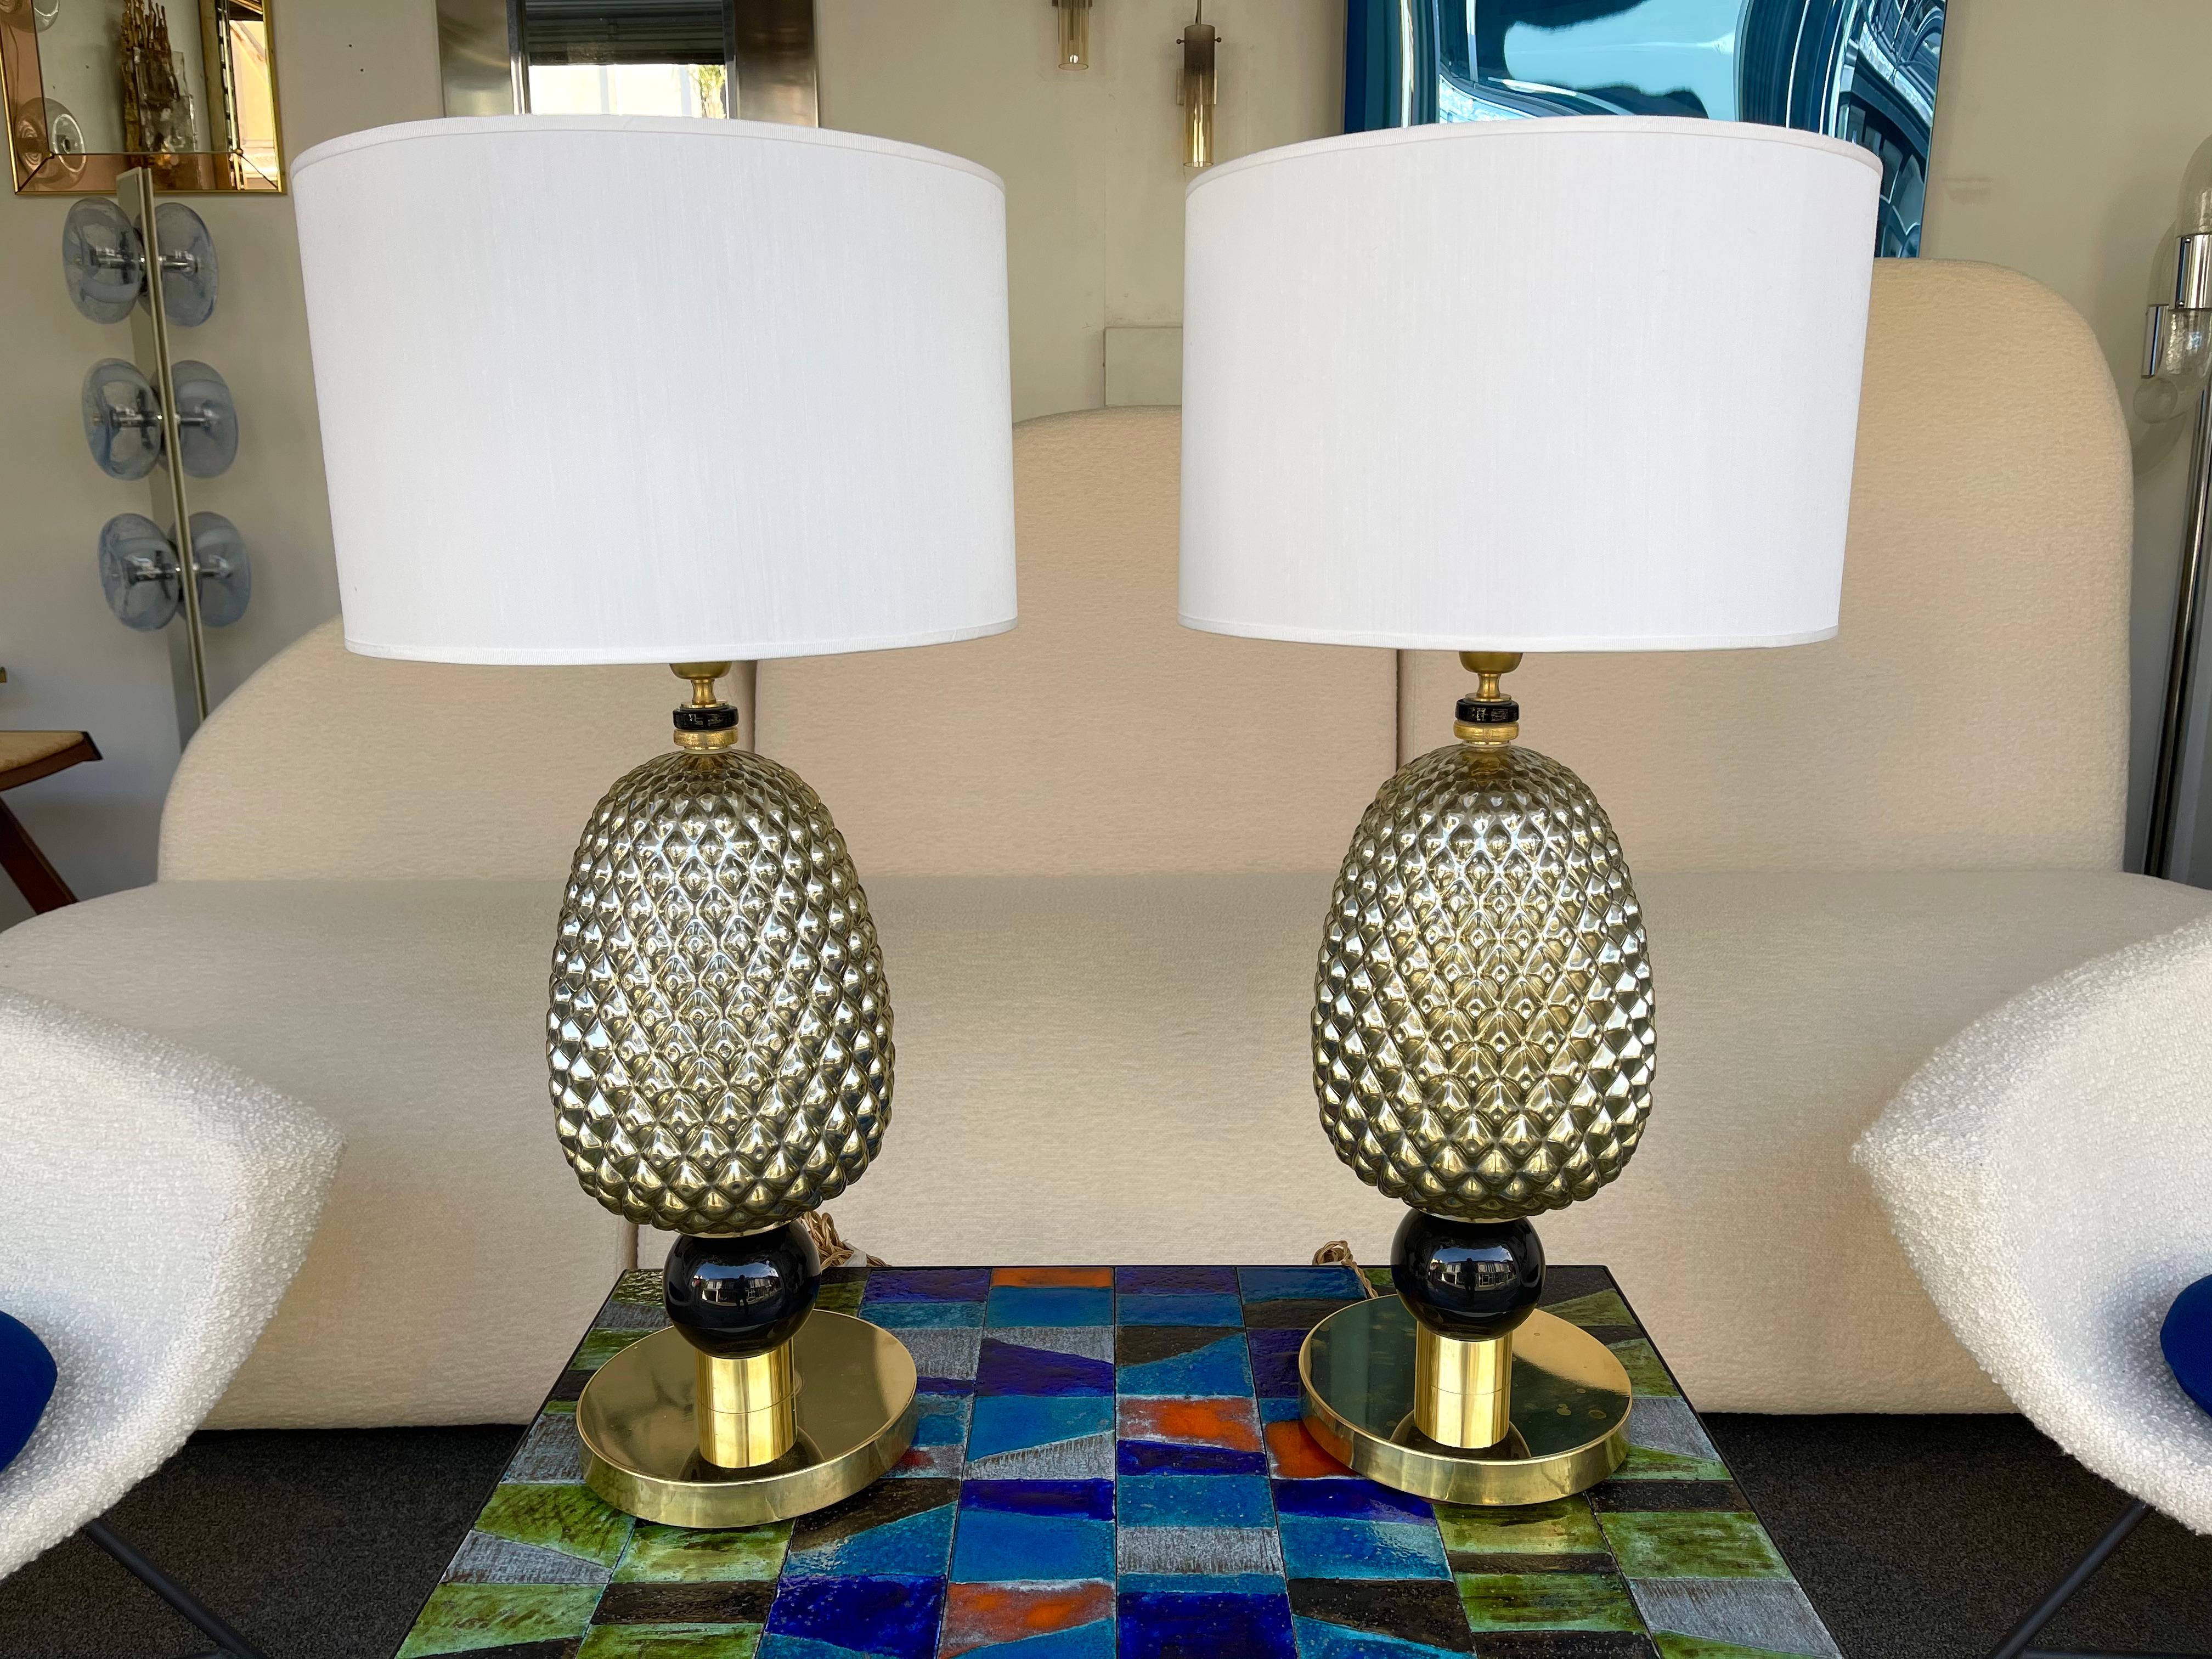 Pair of table or bedside lamps silver goldish gold and black ball pineapple palm tree Murano glass and brass. In the mood of Maison Jansen, Charles, Hollywood regency, Veronese, Venini, Vistosi, La Murrina, Mazzega.

Demo shades not included.